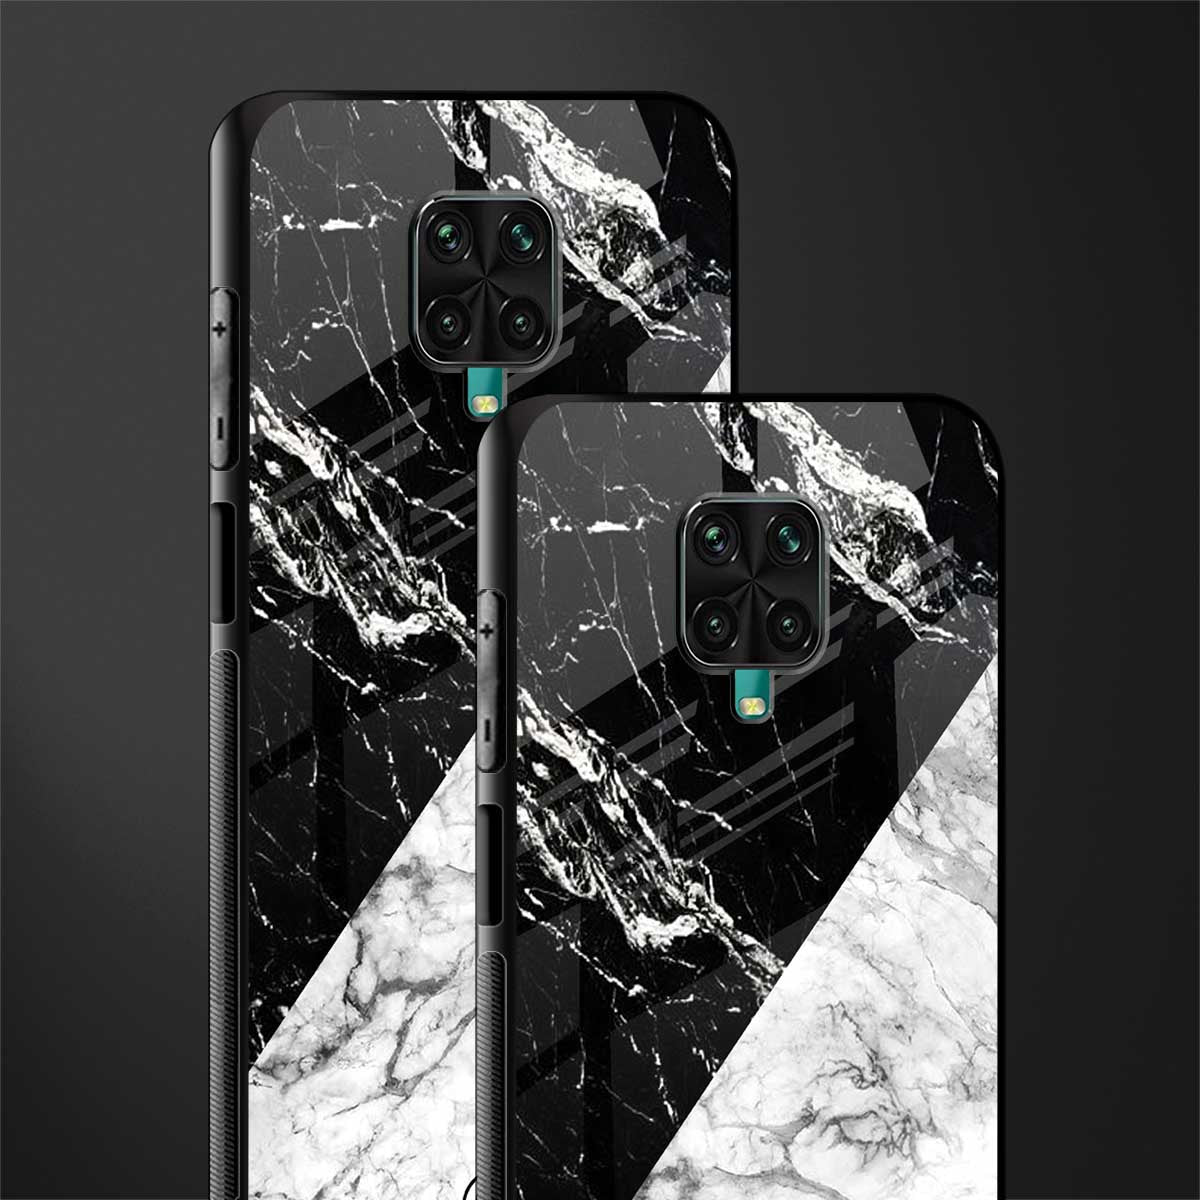 fatal contradiction phone cover for redmi note 9 pro max